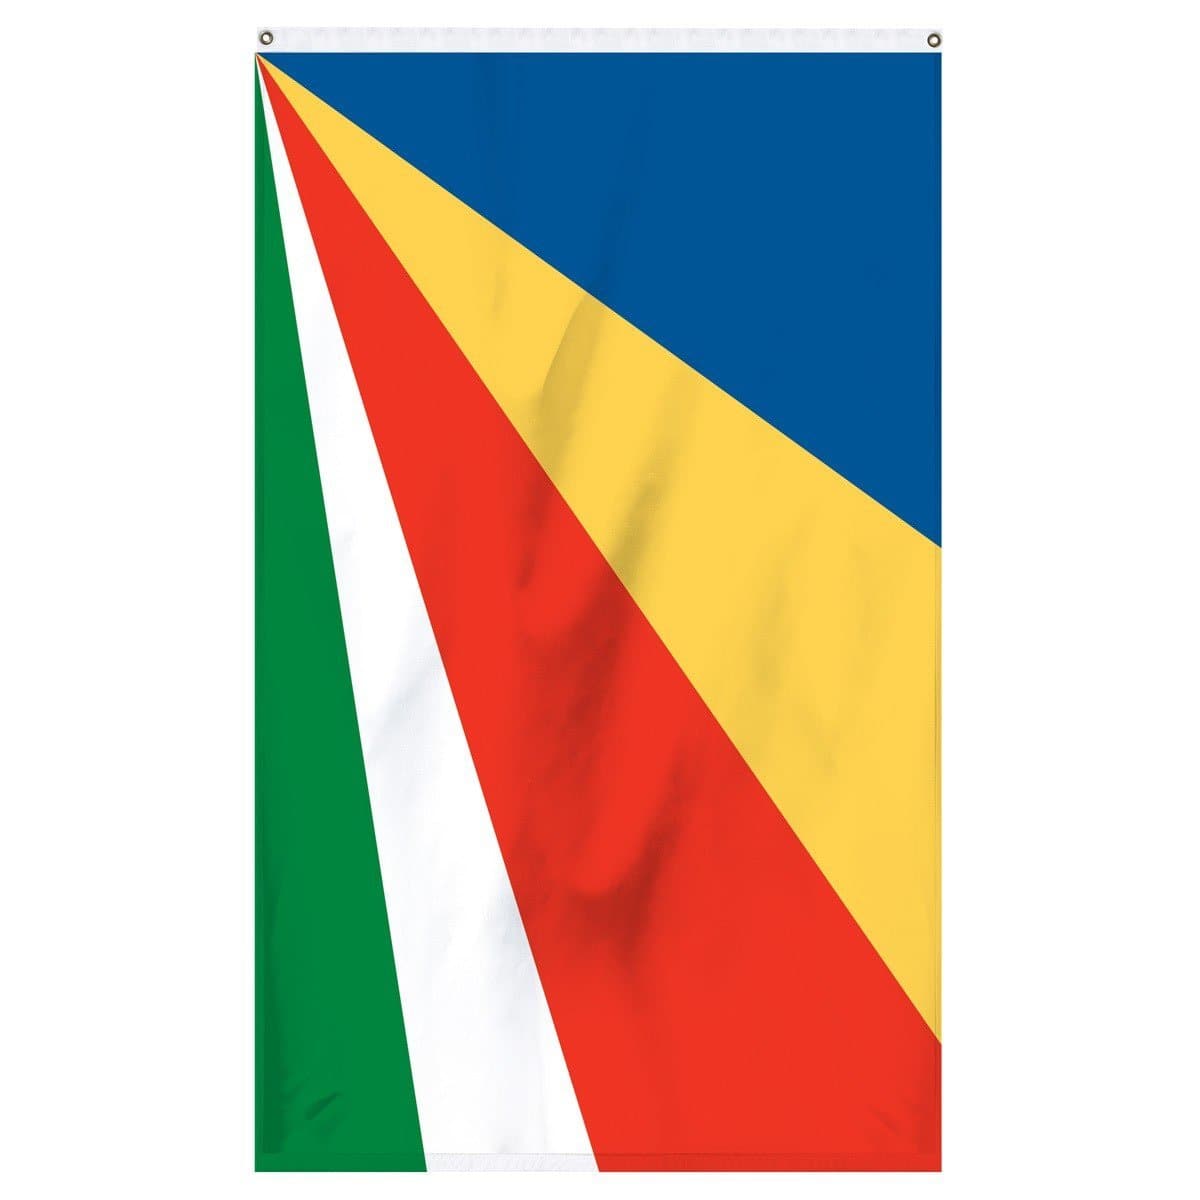 Seychelles National Flag for sale to buy online from Atlantic Flag and Pole. Beautiful colorful flag with blue, yellow, red, white, and green. 